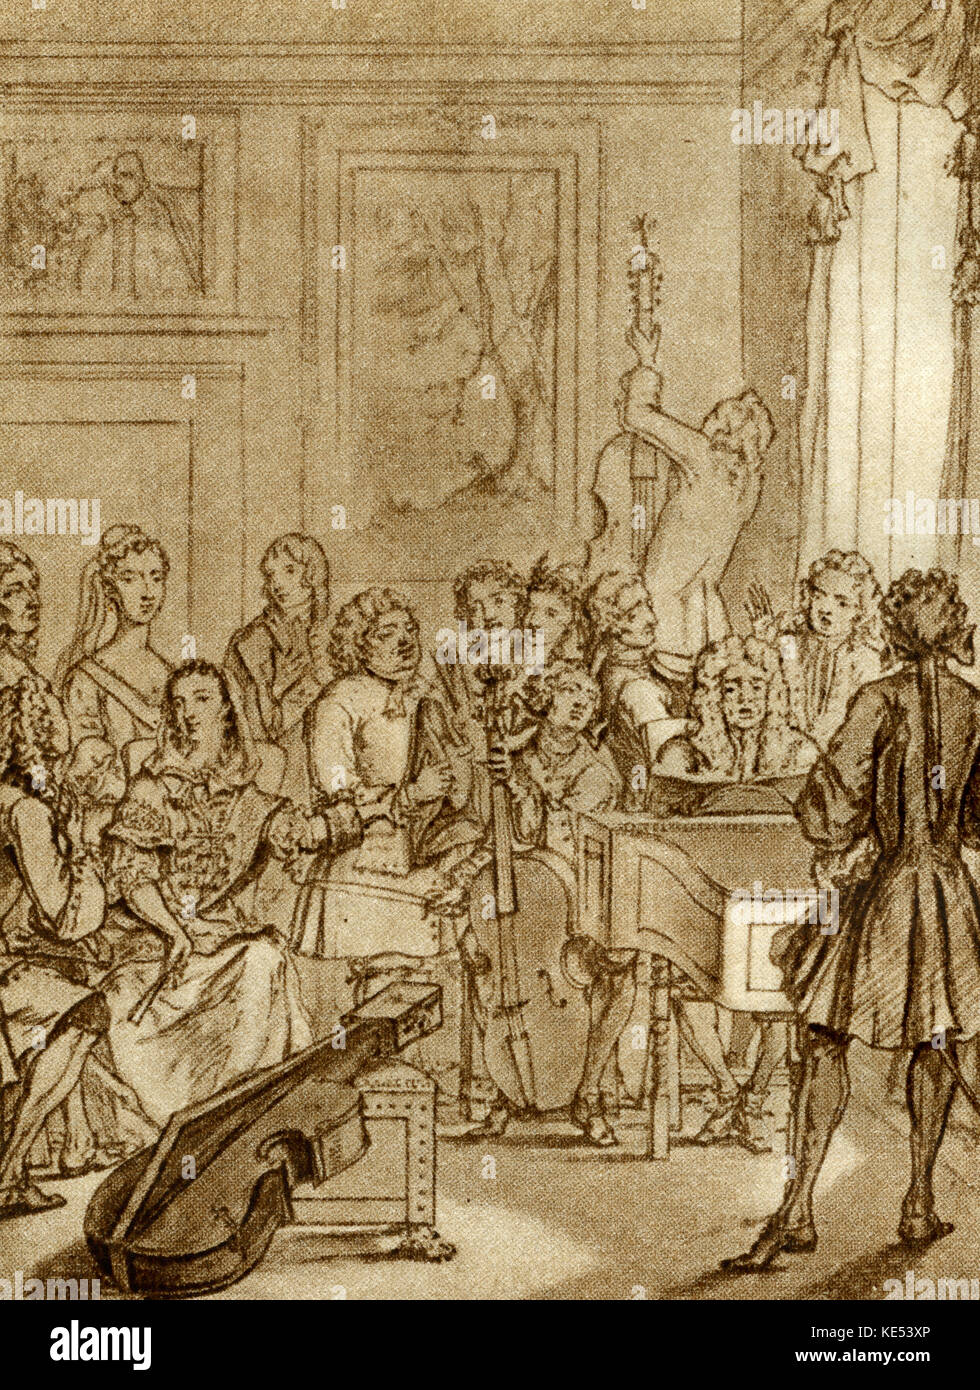 John James (Johann Jacob) Heidegger (1659–1749), playing the cembalo or harpsichord at a chamber music gathering in Montague House, London. Drawing by Marcellus Laroon. (Swiss count and leading impresario of masquerades in the early part of the 18th century. William Hogarth published a satire on Heidegger in his print, Masquerades and Operas.) Stock Photo